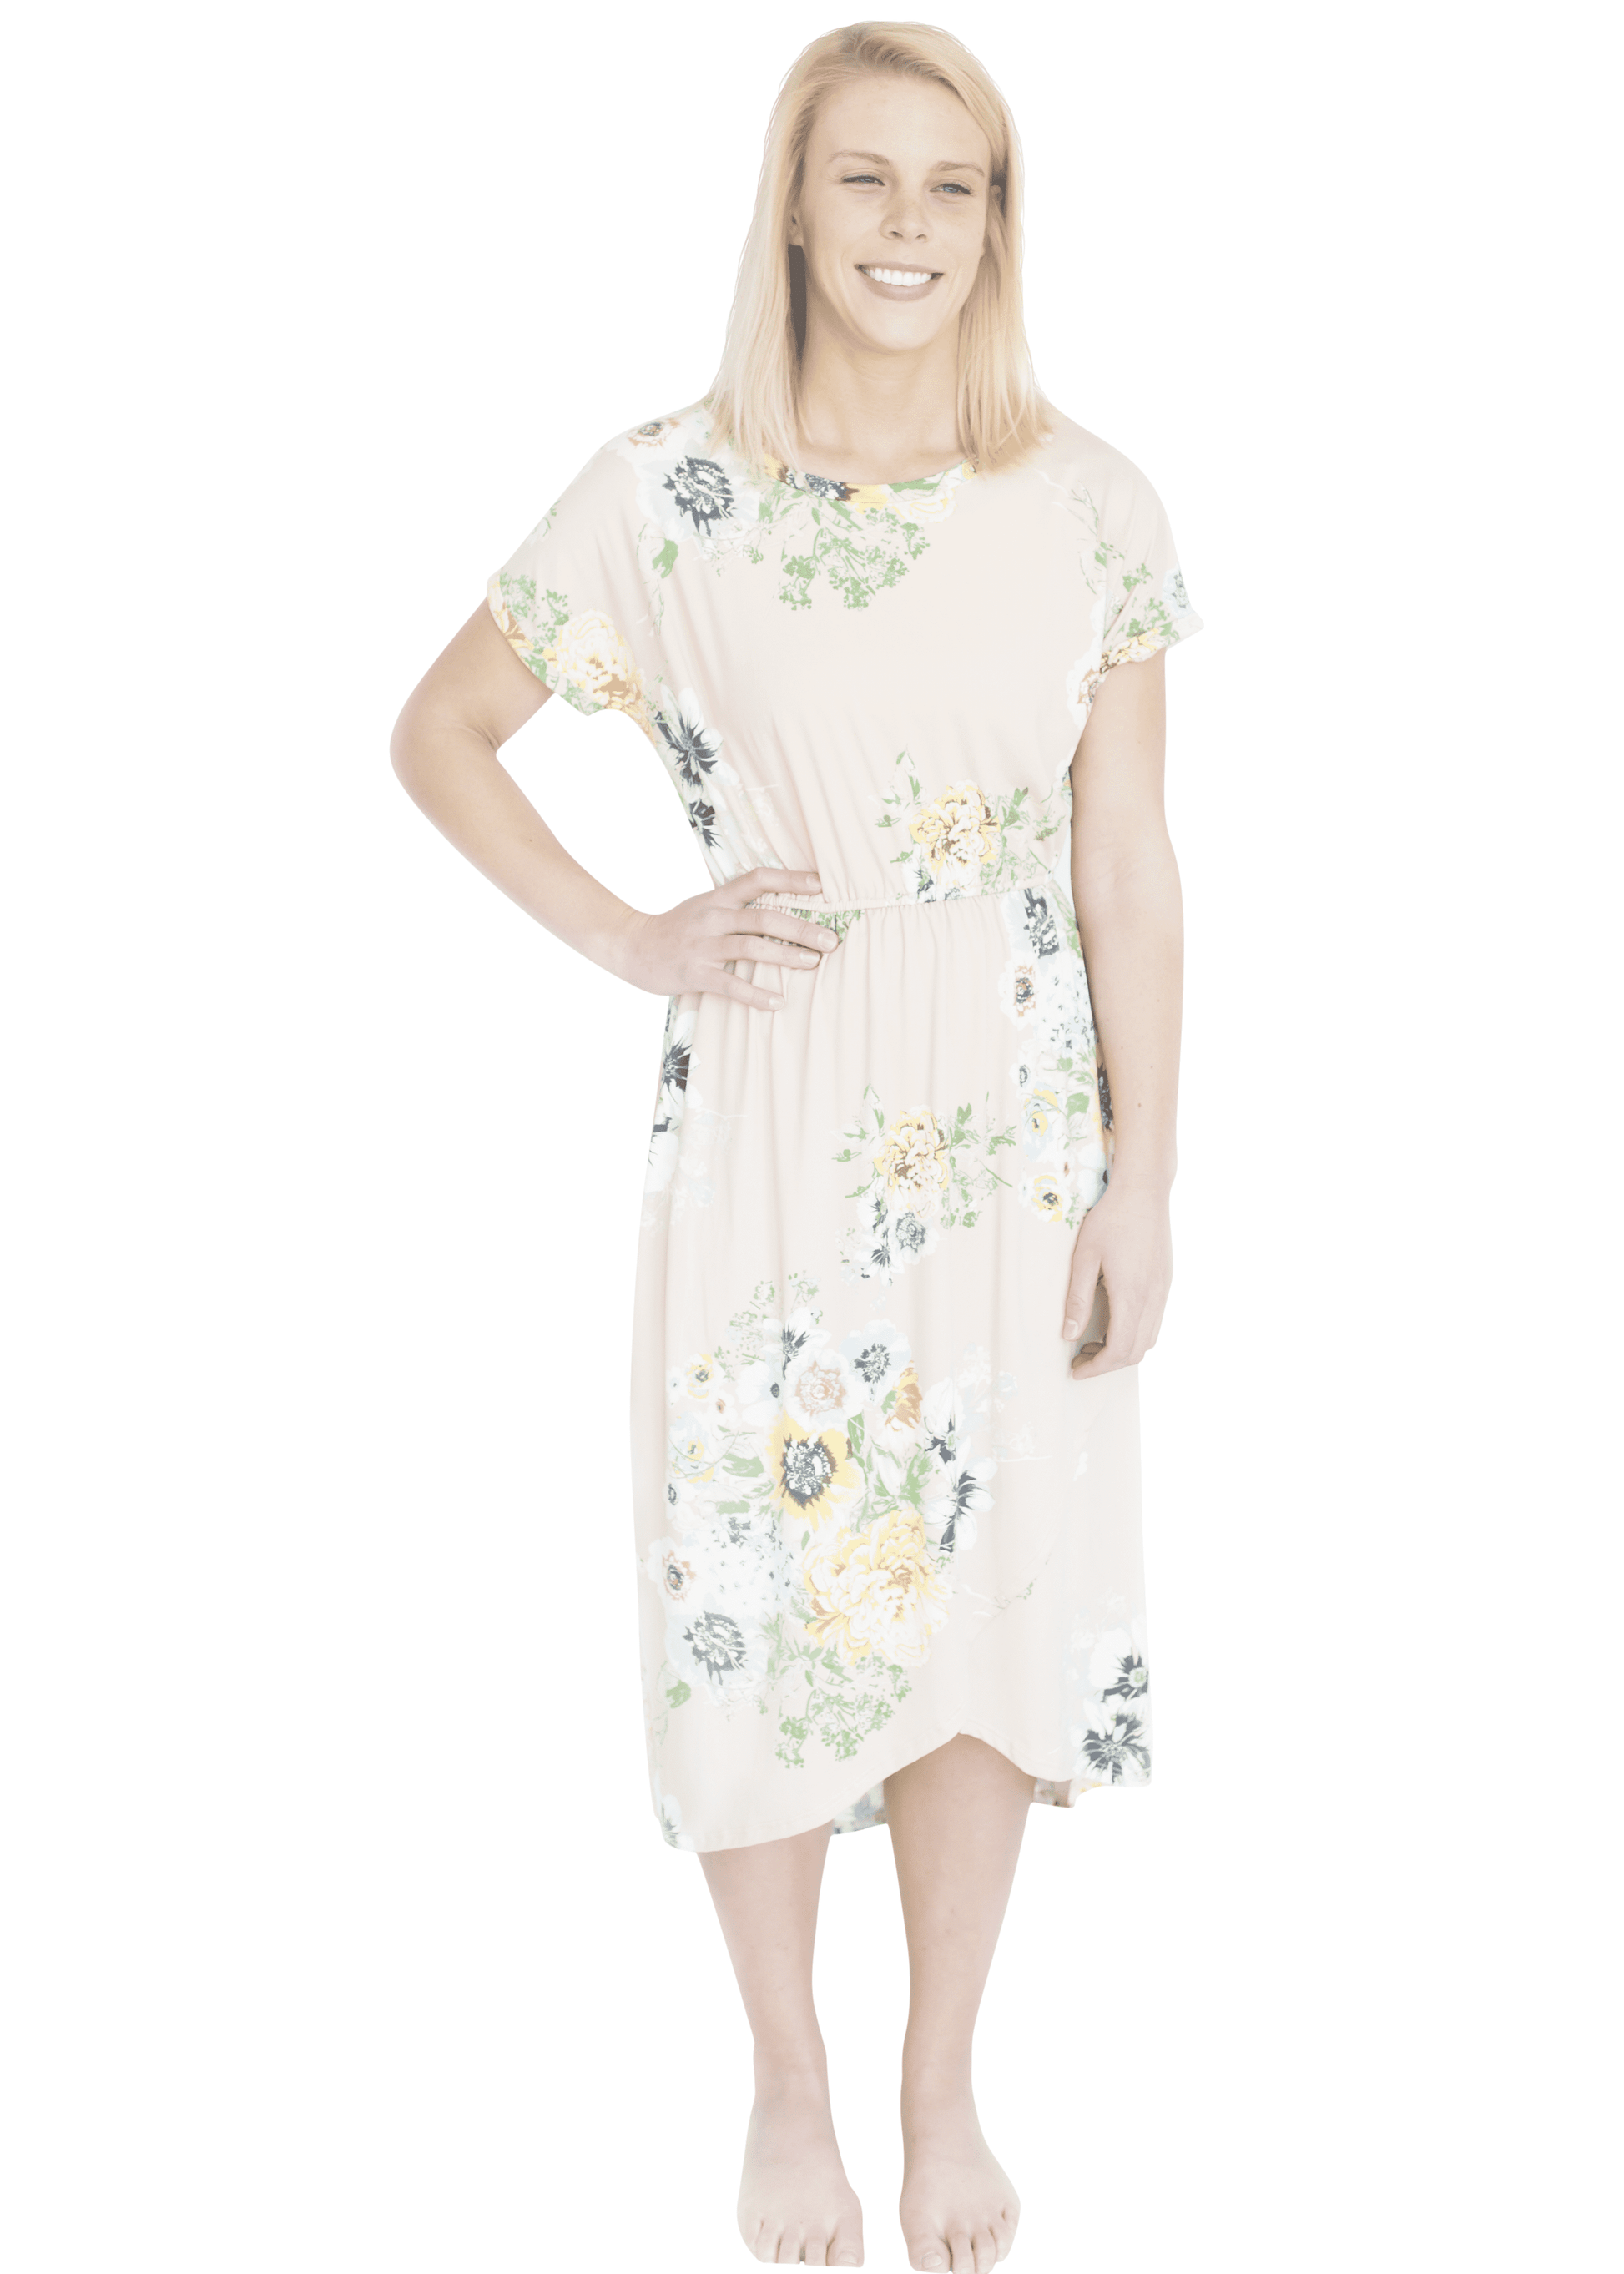 midi length floral dress with elastic waist that comes in blush, mint or navy florals.